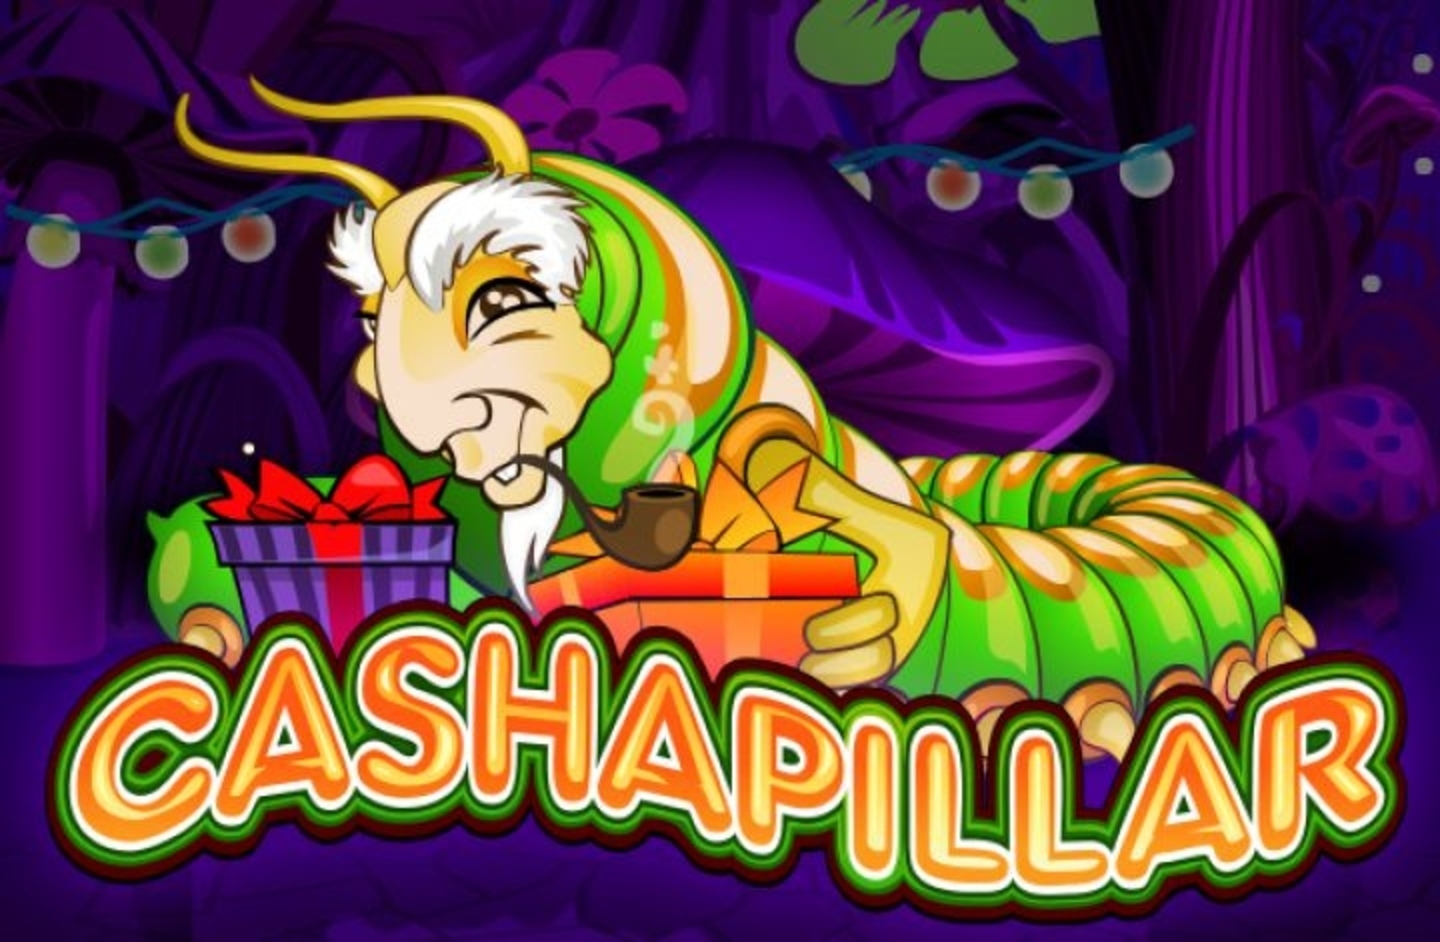 The Cashapillar Online Slot Demo Game by Microgaming